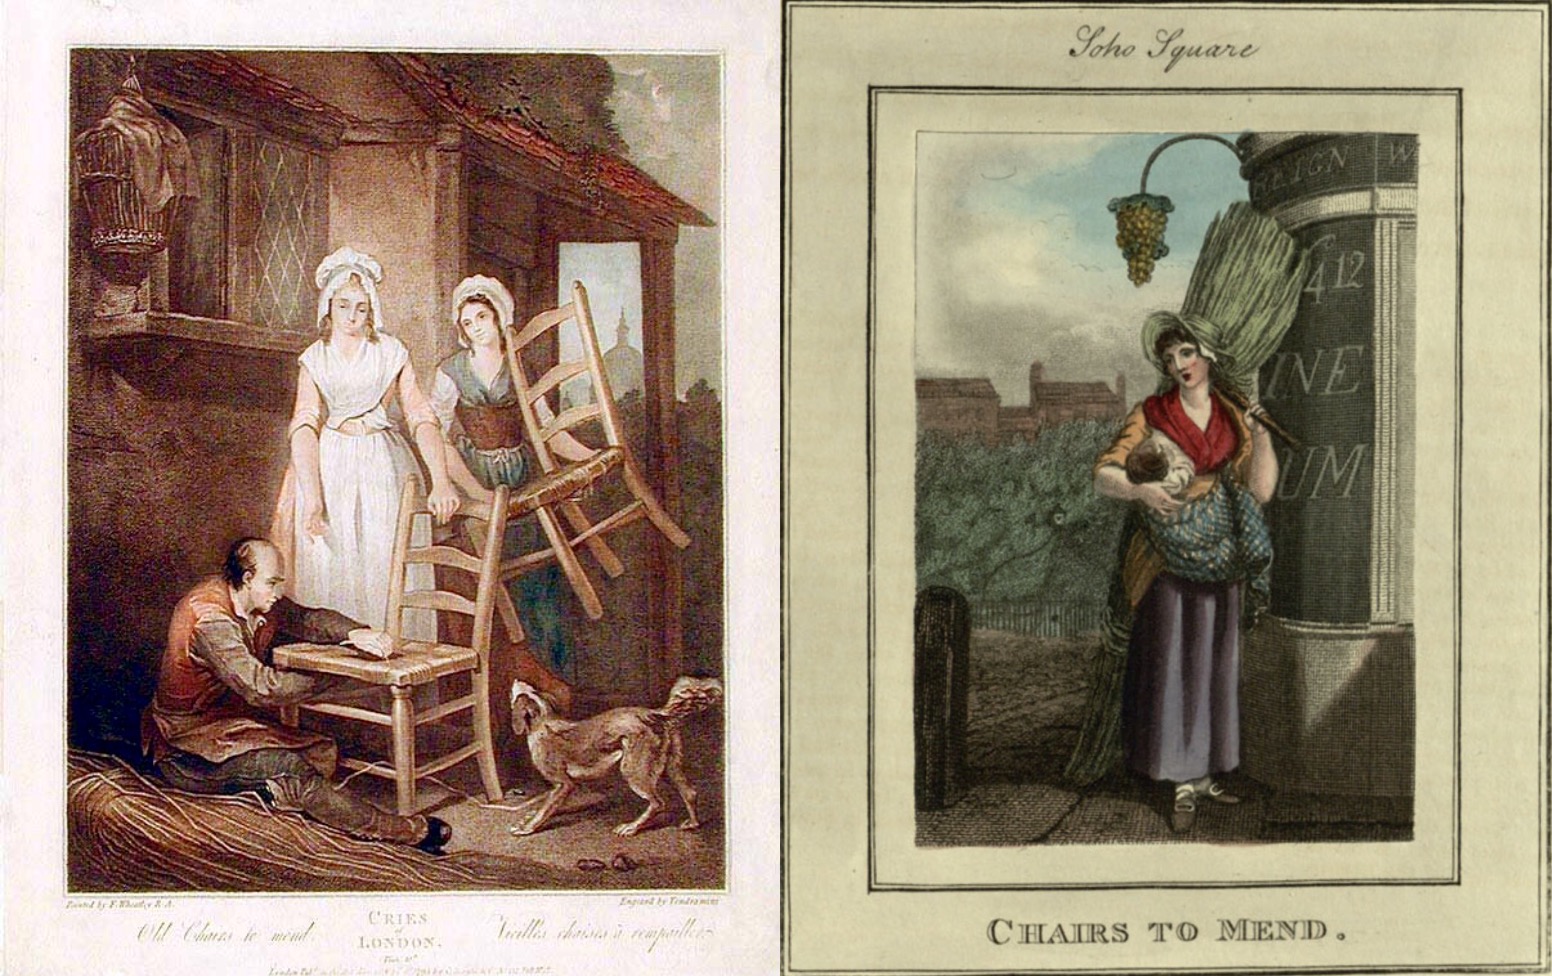 "Old Chairs to Mend" from two "Cries of London" from (left) 1795 and (right) 1821, (British Library).